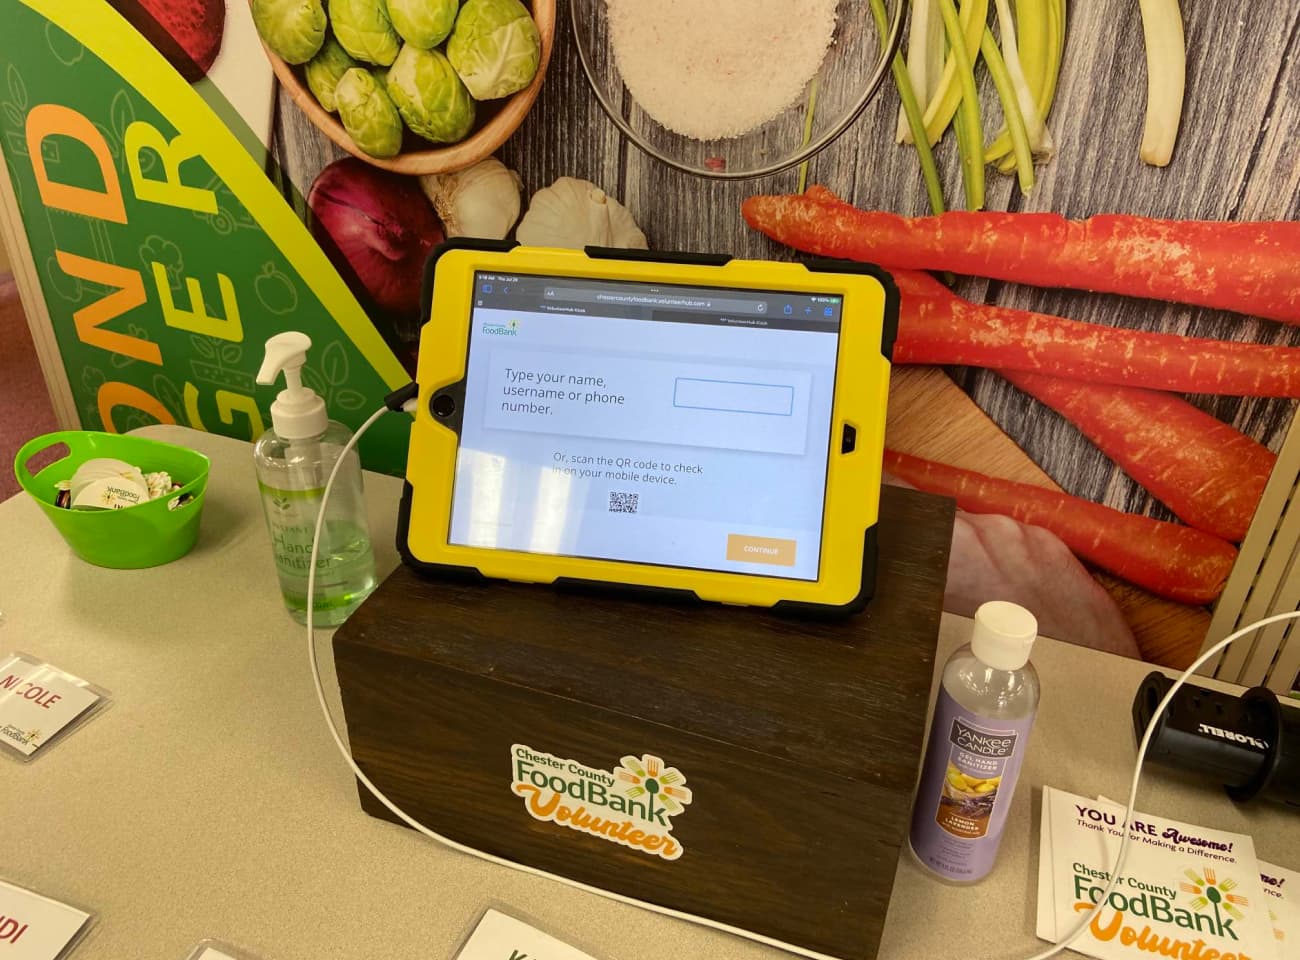 A tablet open to the VolunteerHub mobile kiosk against a backdrop of a mural of vegetables.